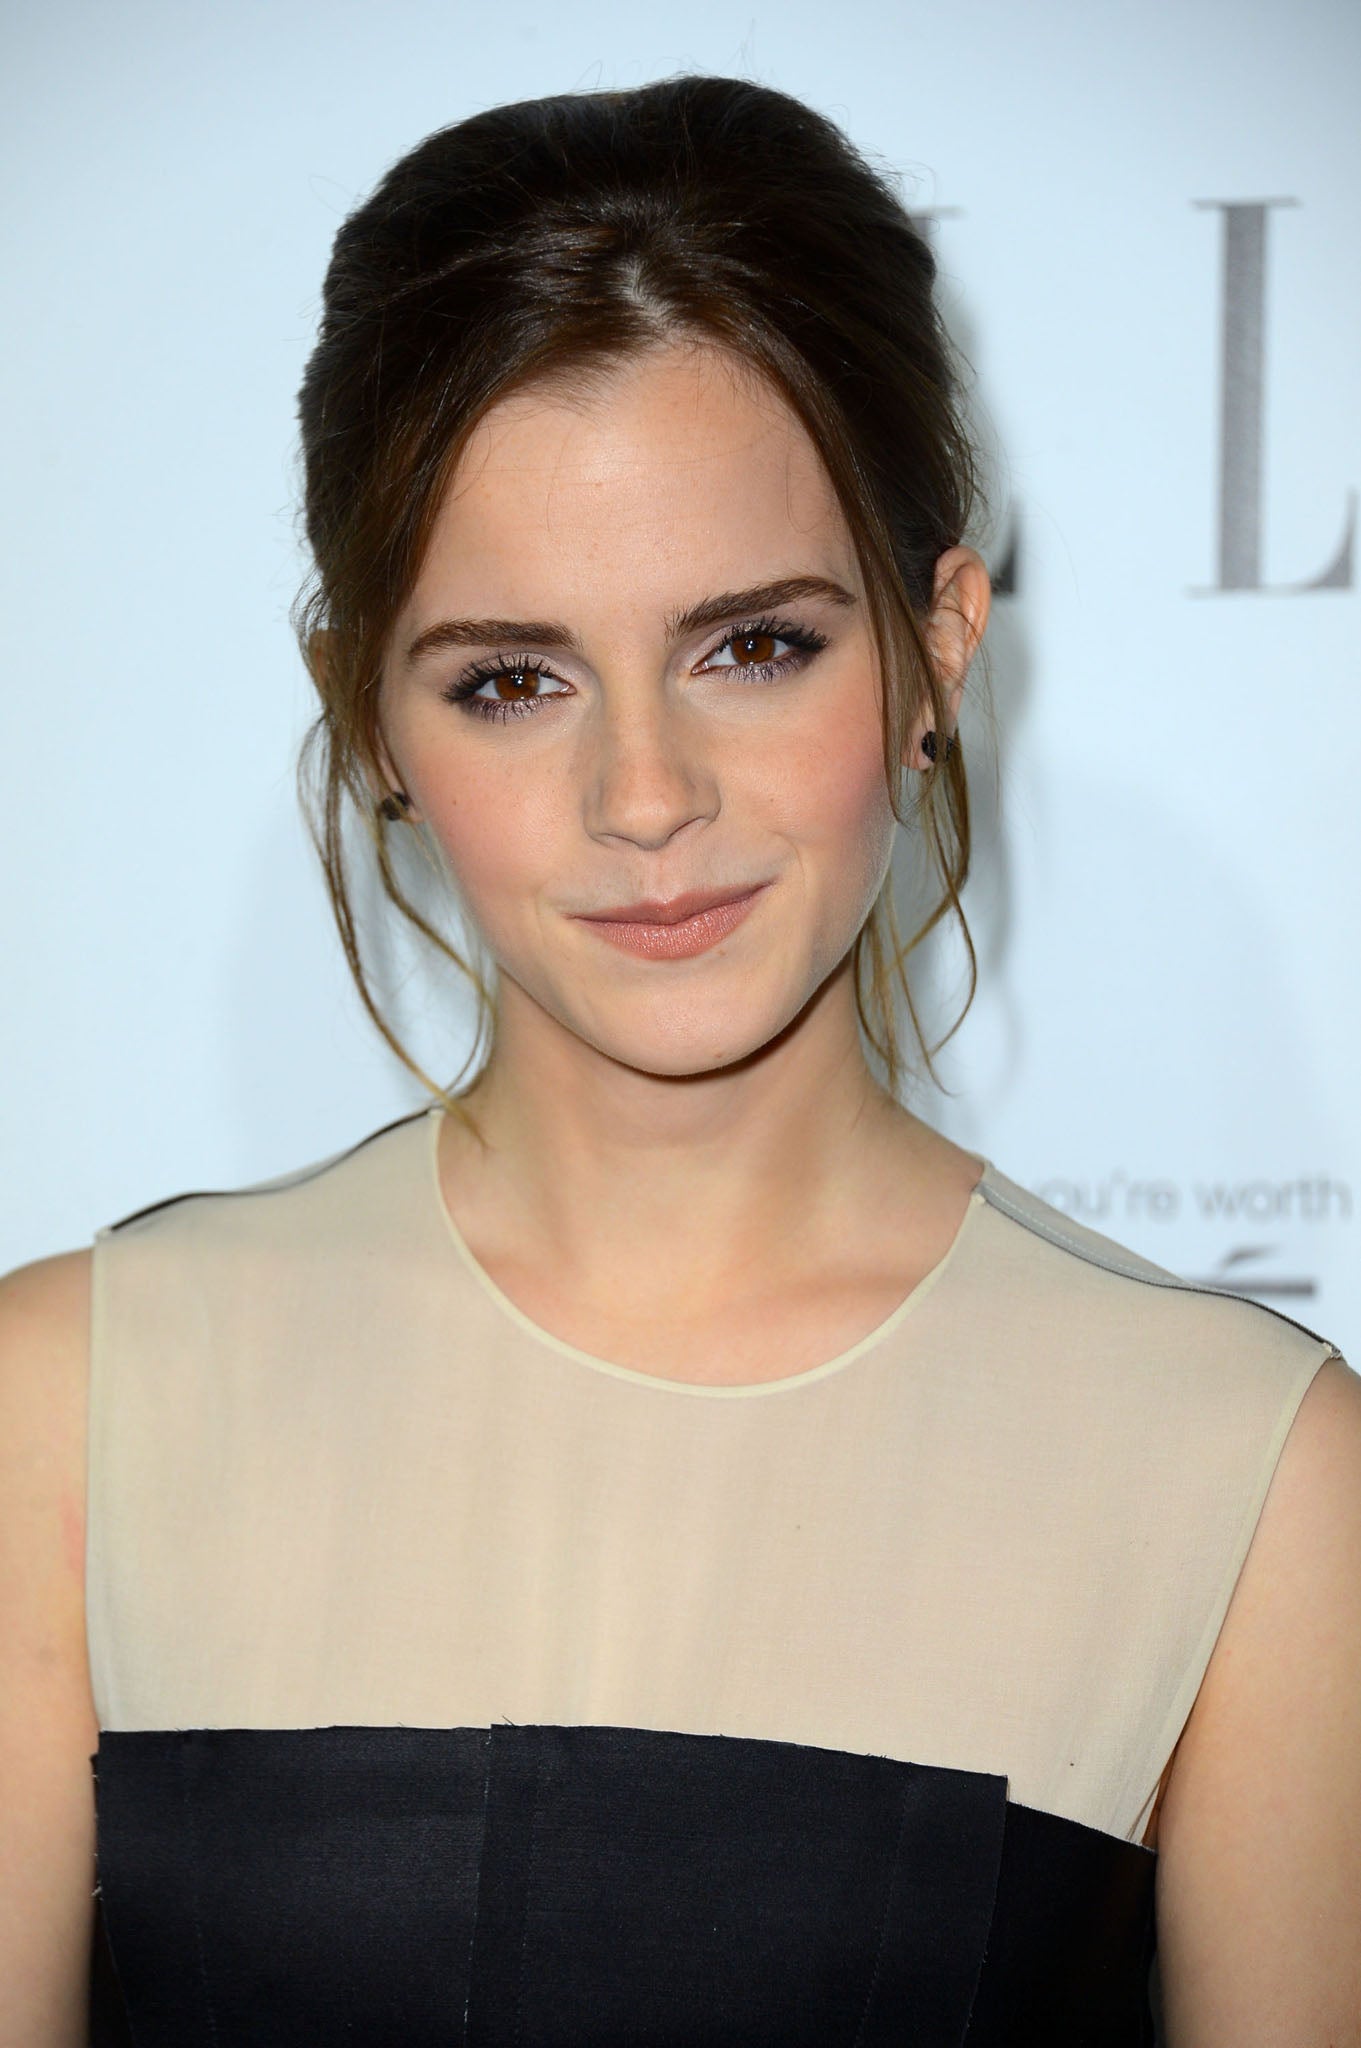 Emma Watson says she couldn't identify with her latest film role as Nicki in The Bling Ring